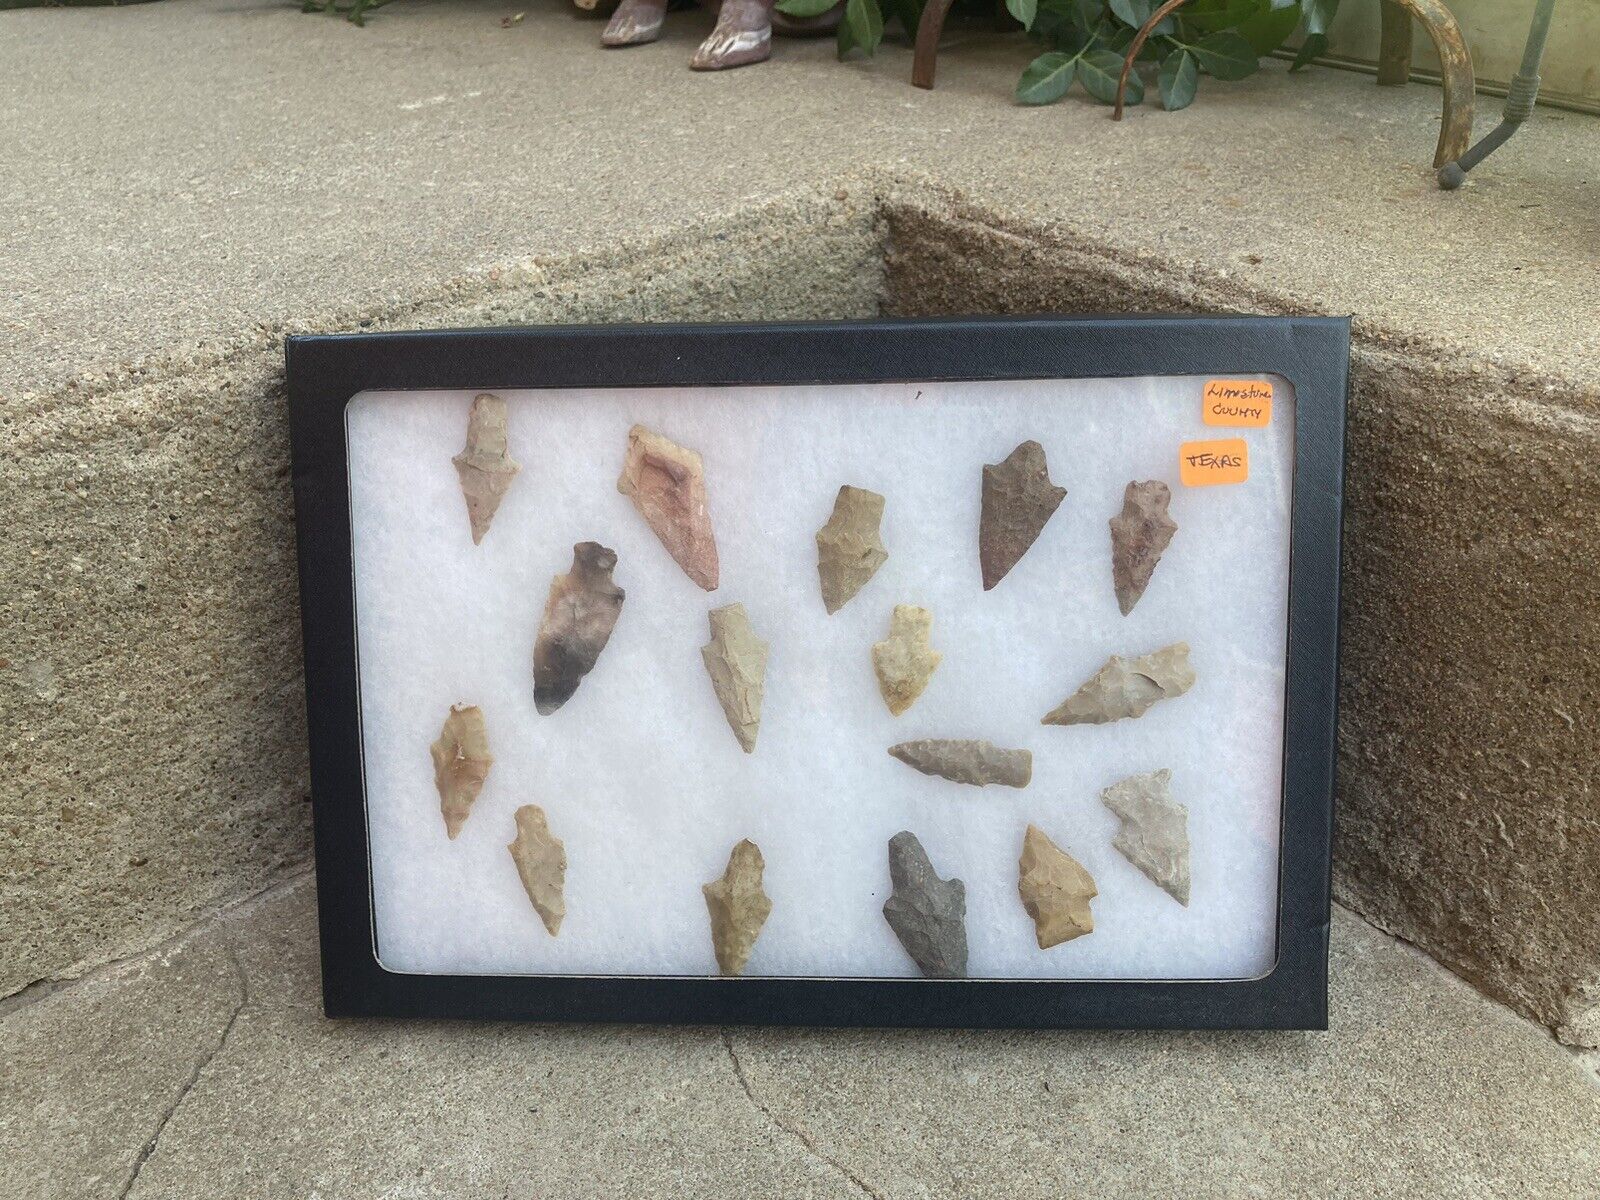 Native American Indian Stone Arrowheads Lot of Limestone County of Texas